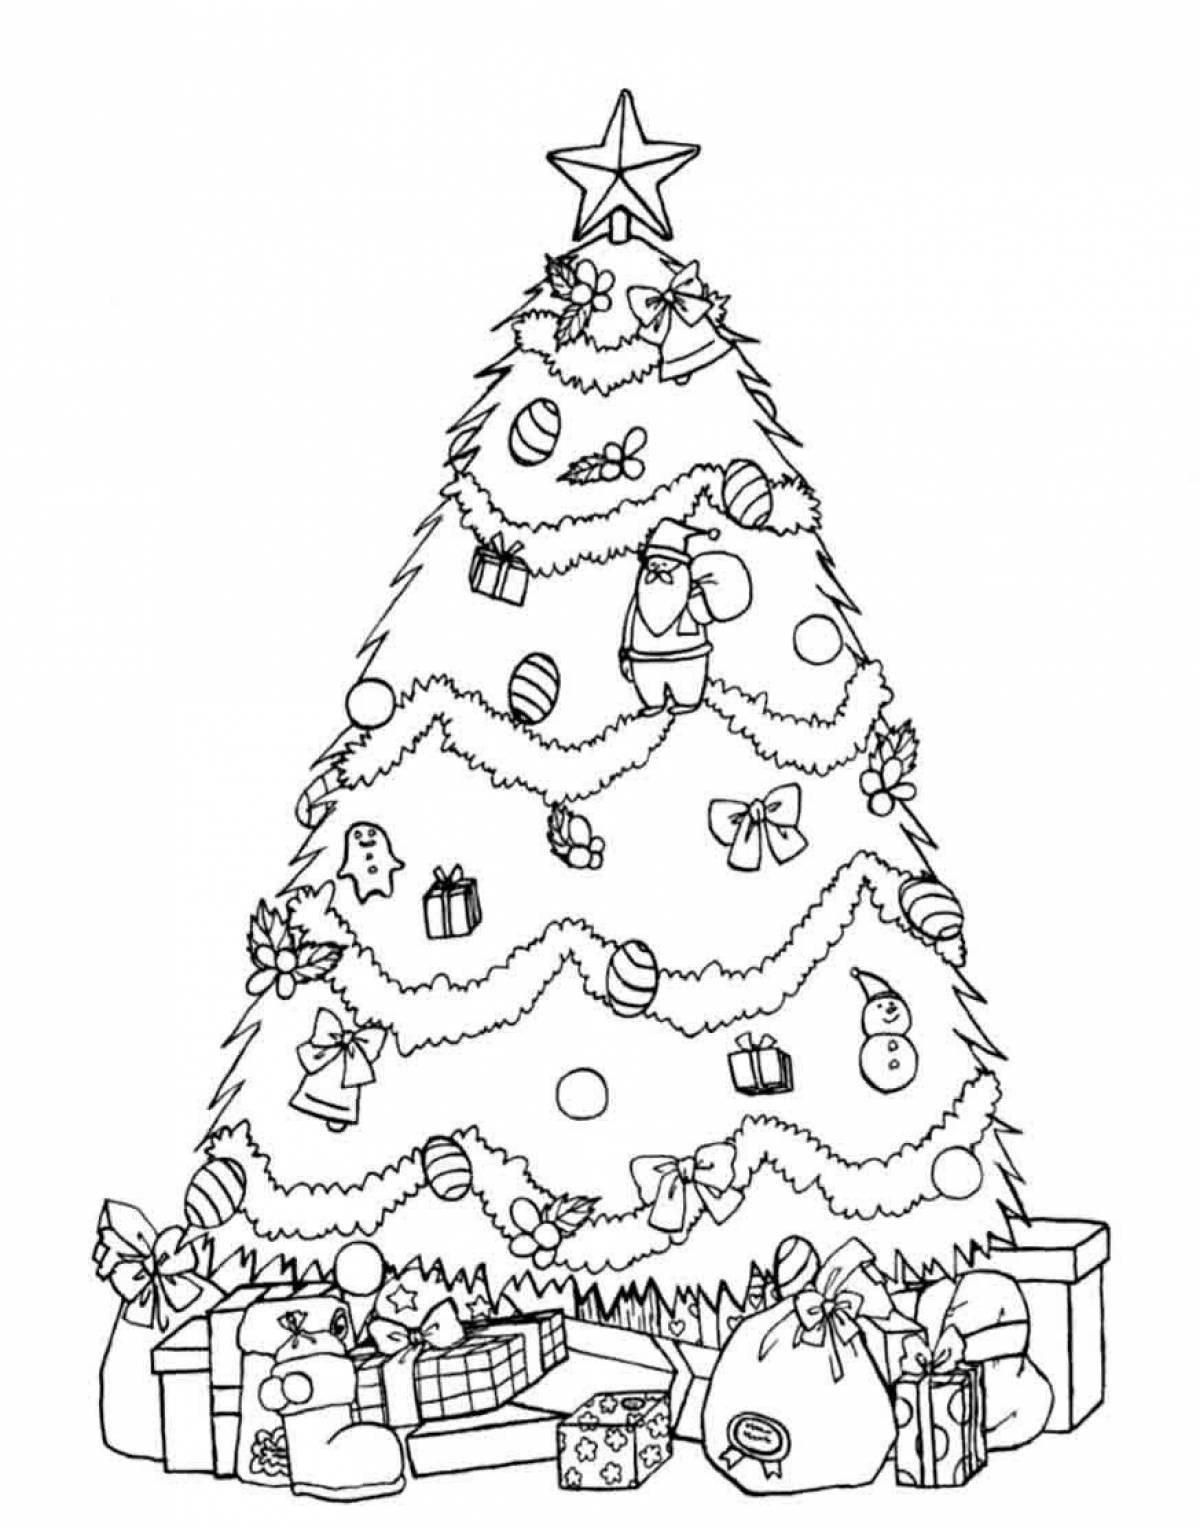 Christmas tree with toys #7